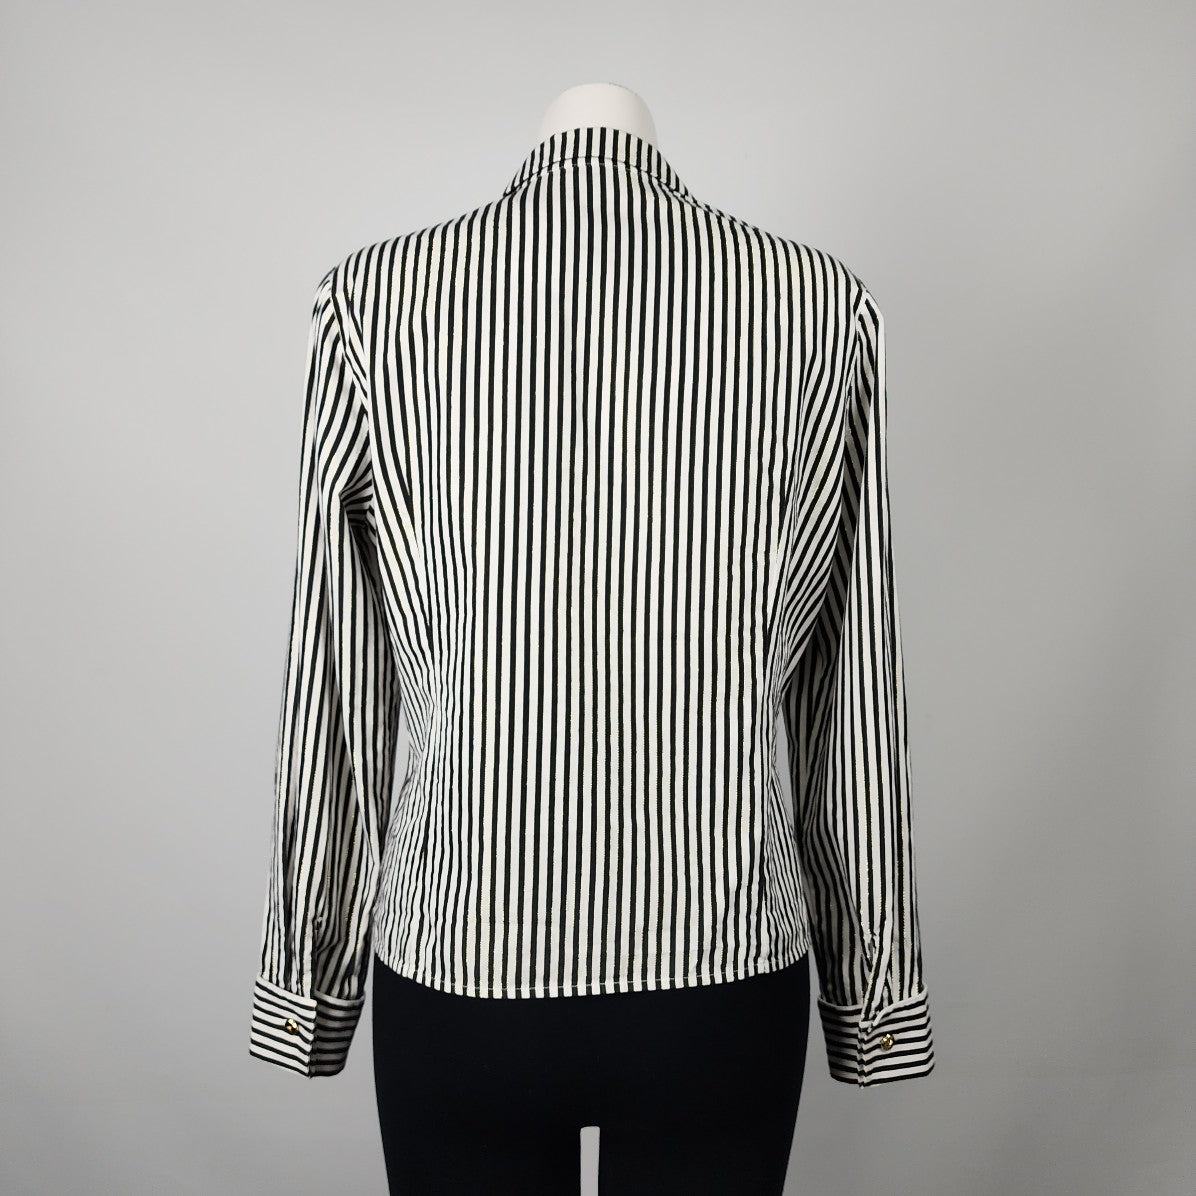 Vintage Black Stripped Button Up Collared Top Size S/M